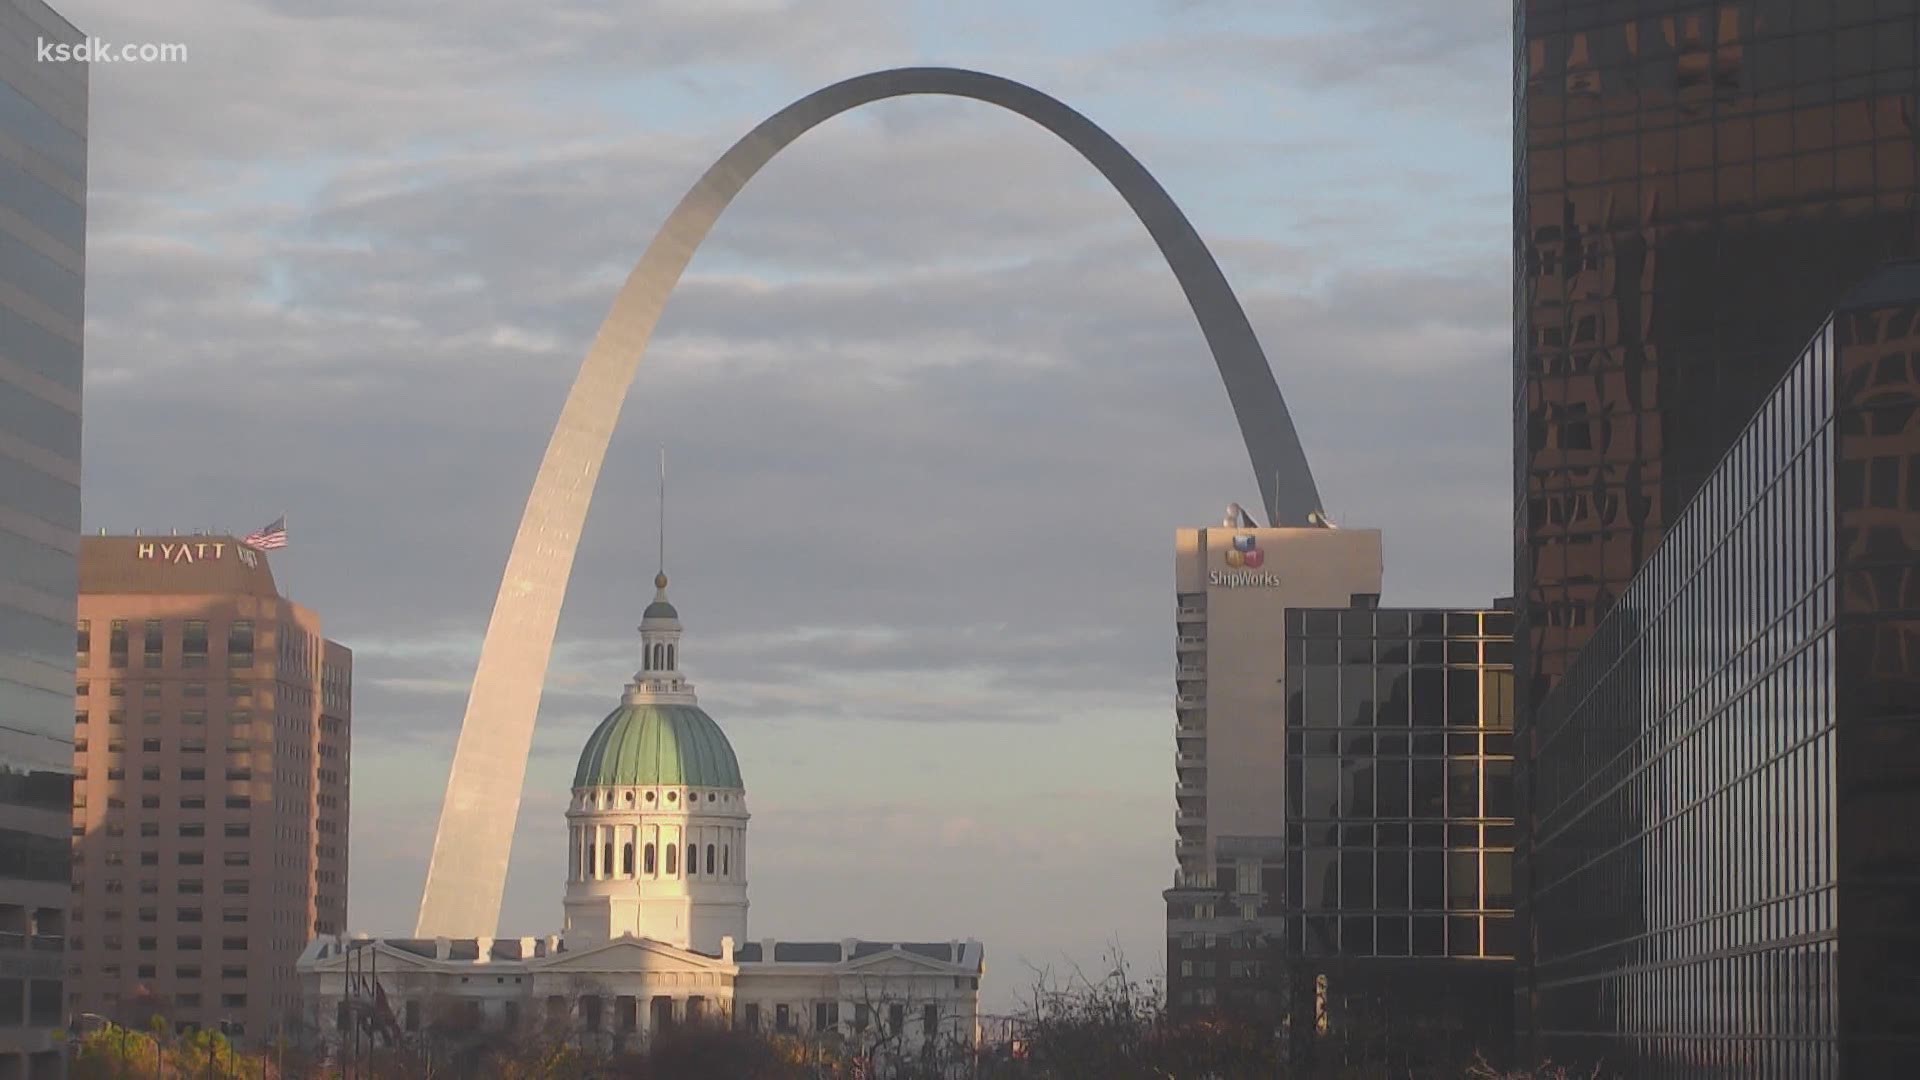 You can find it online at the Gateway Arch Park's website and Facebook